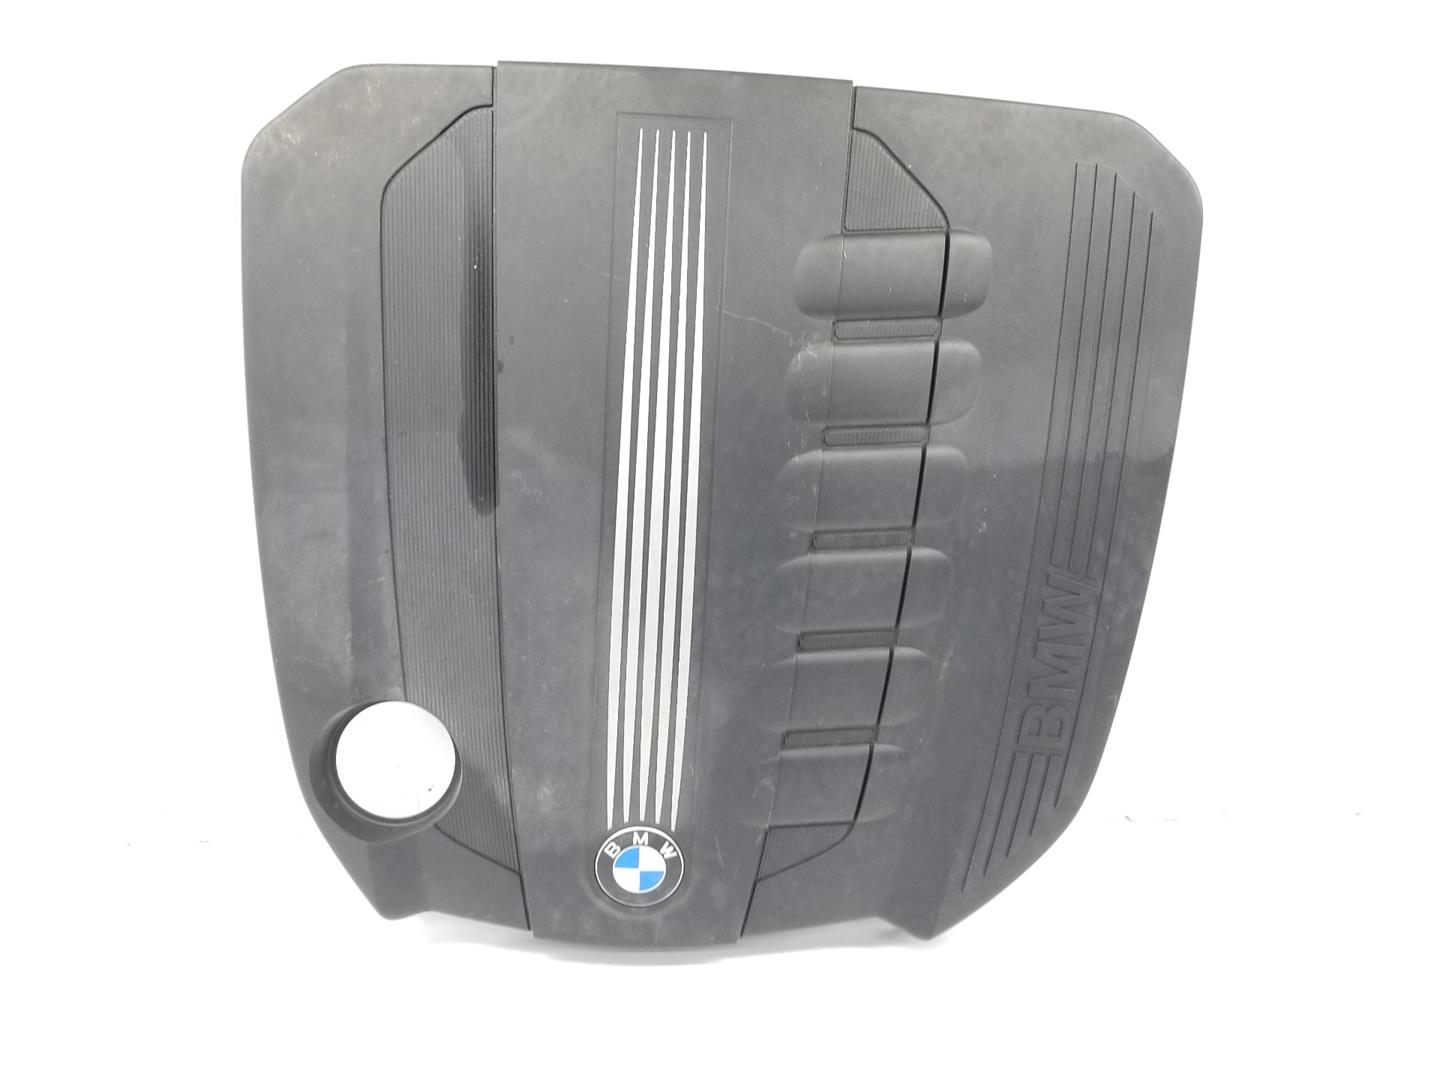 BMW 5 Series F10/F11 (2009-2017) Engine Cover 11147800575, 11147800575 24189898